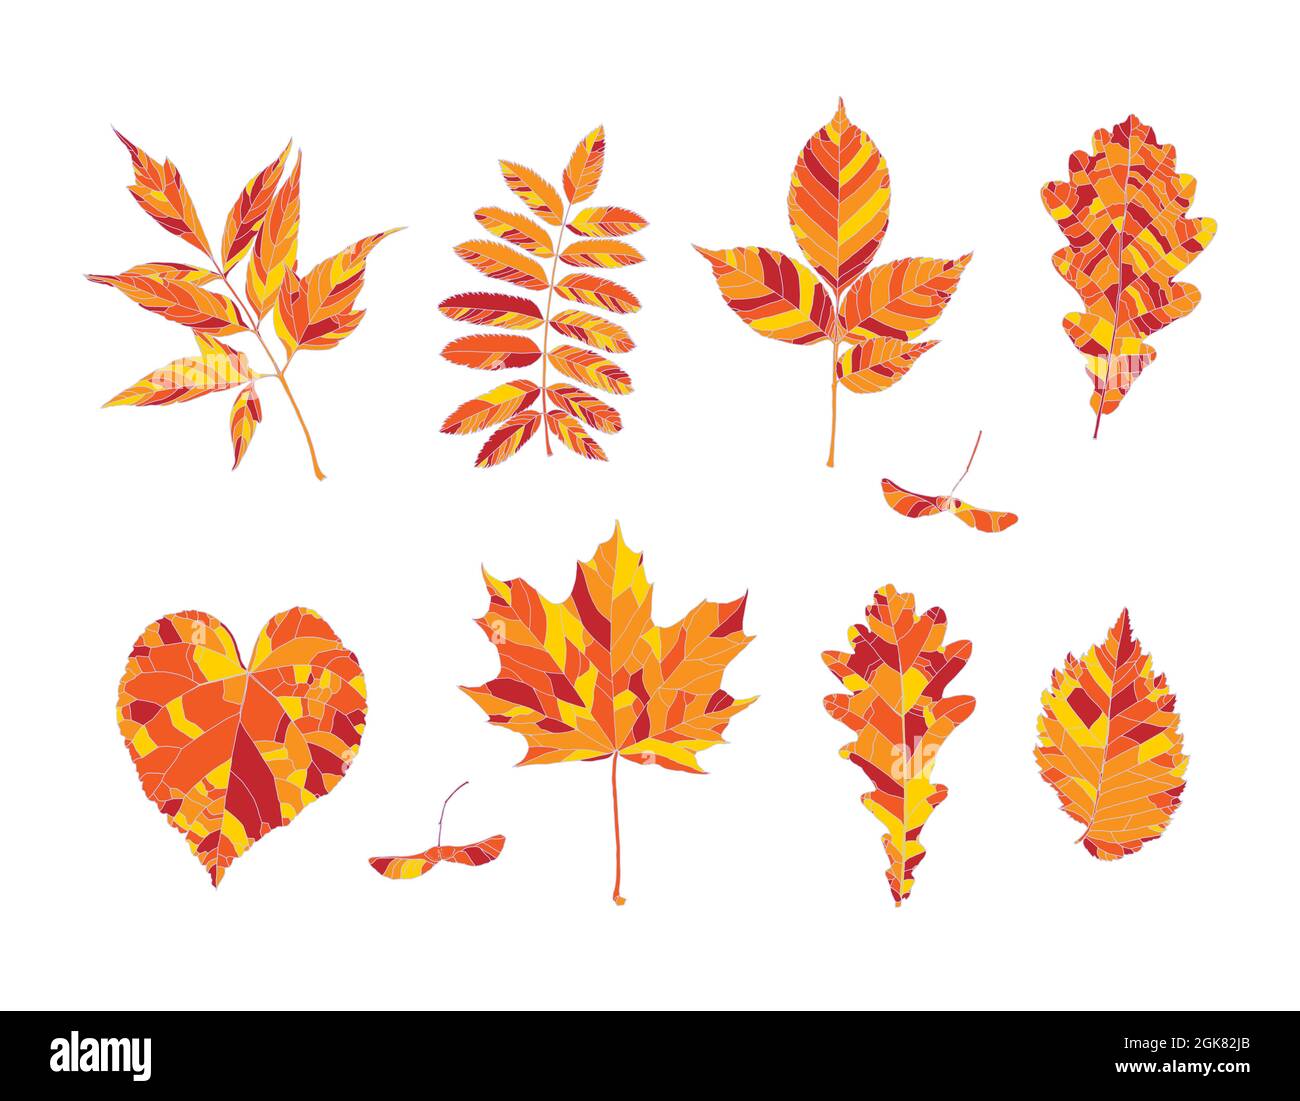 Set of hand drawn orange, red and yellow autumn leaves - maple, maple seeds, ash-leaved maple, rowan, ash, oak, linden, elm, isolated on white background. Vector illustration Stock Vector